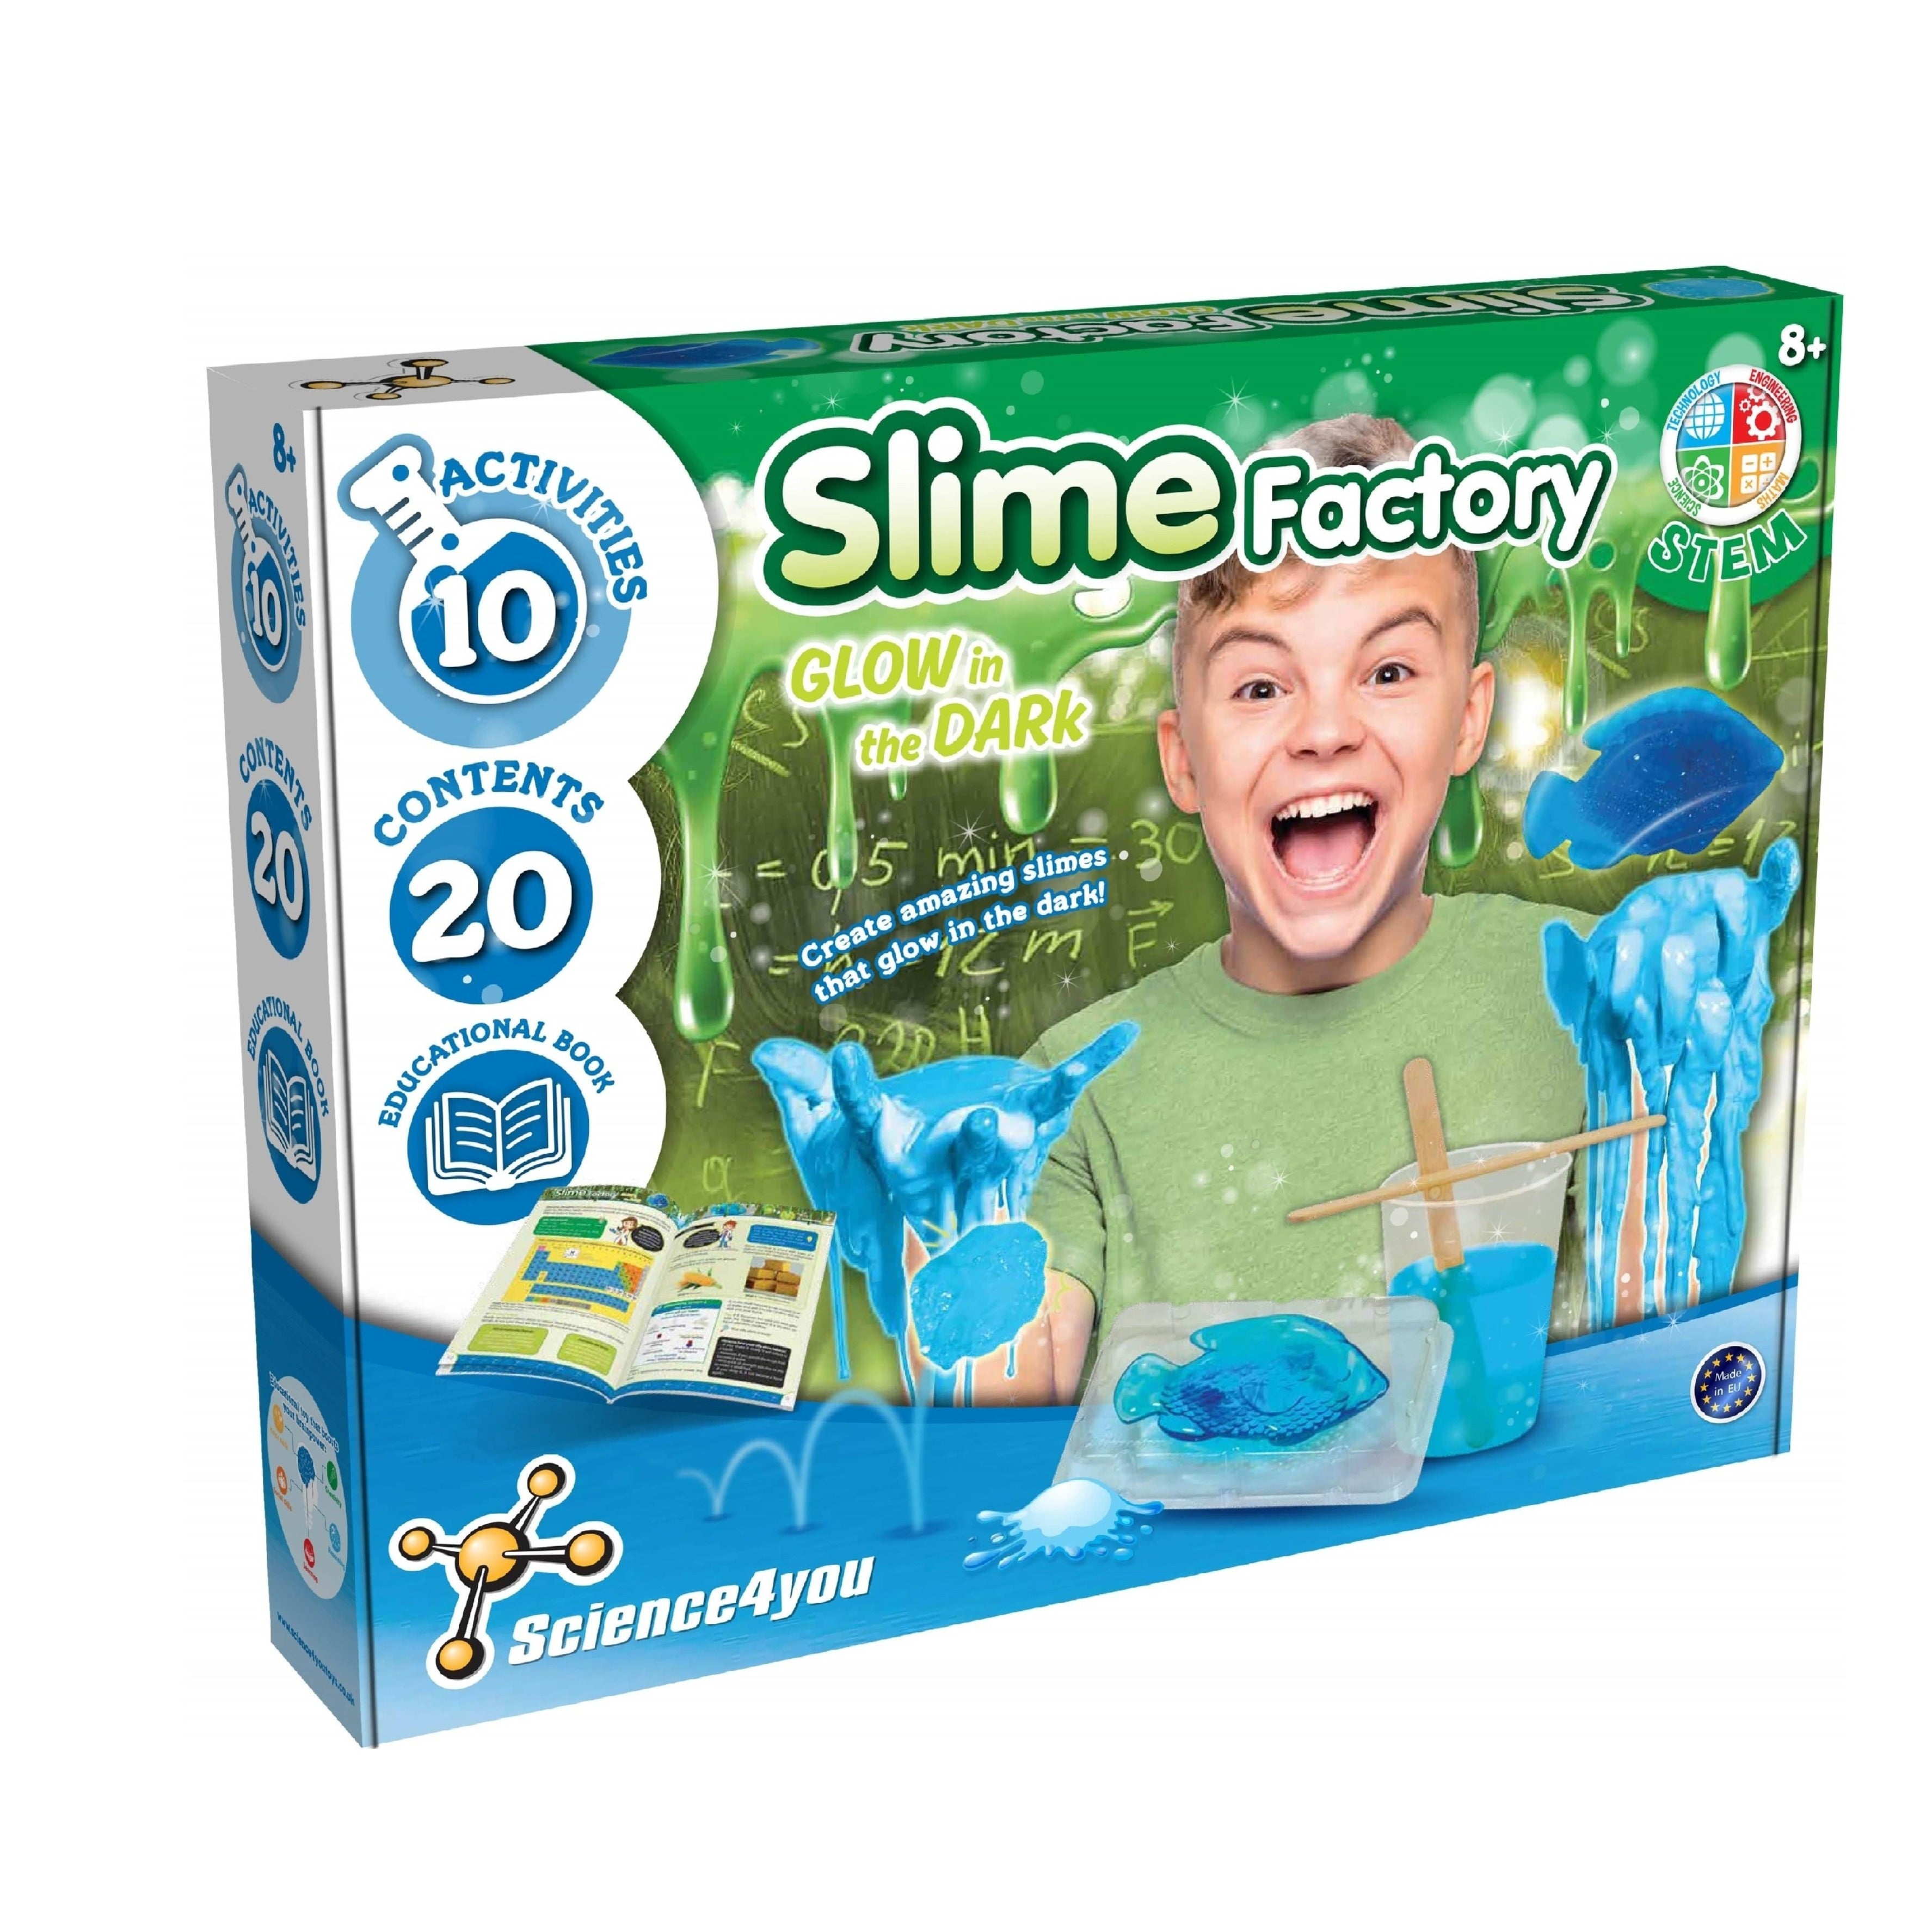 Science for you Toys Science For You Slime Factory GID (TV Ad)